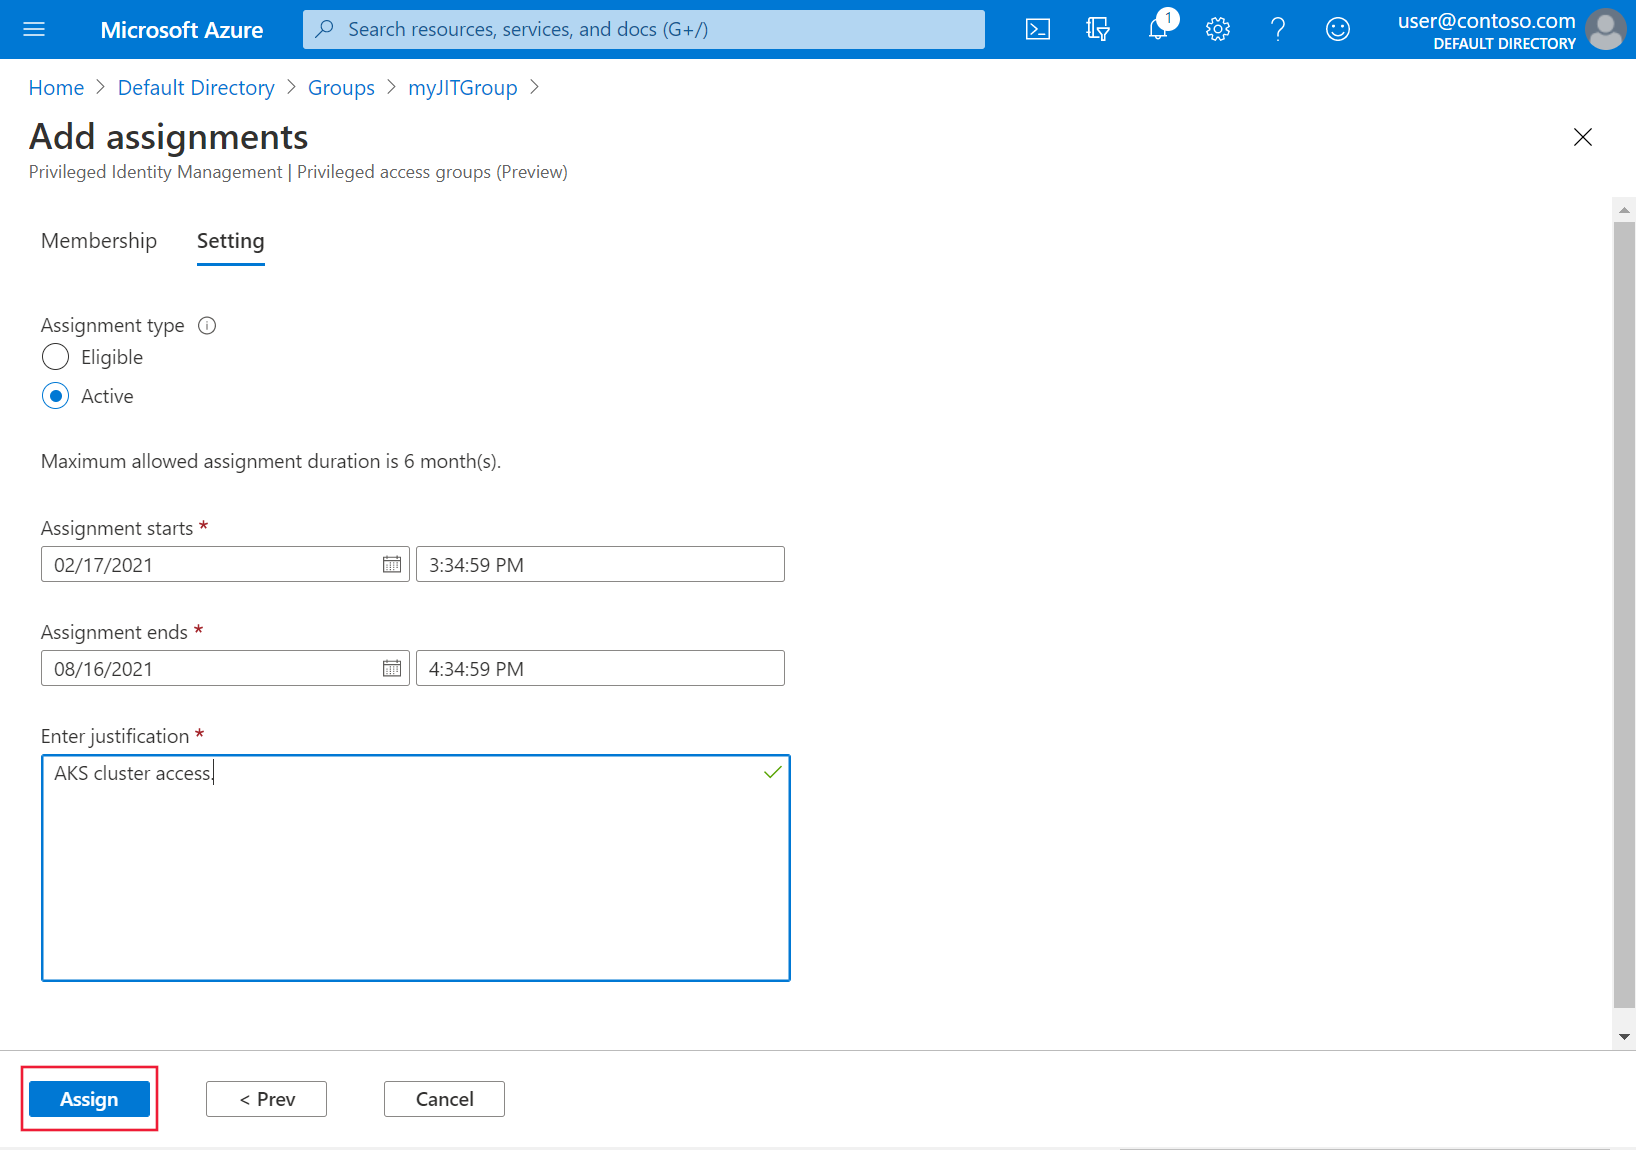 The Azure portal's Add assignments Setting screen is shown. An assignment type of 'Active' is selected and a sample justification has been given. The option 'Assign' is highlighted.